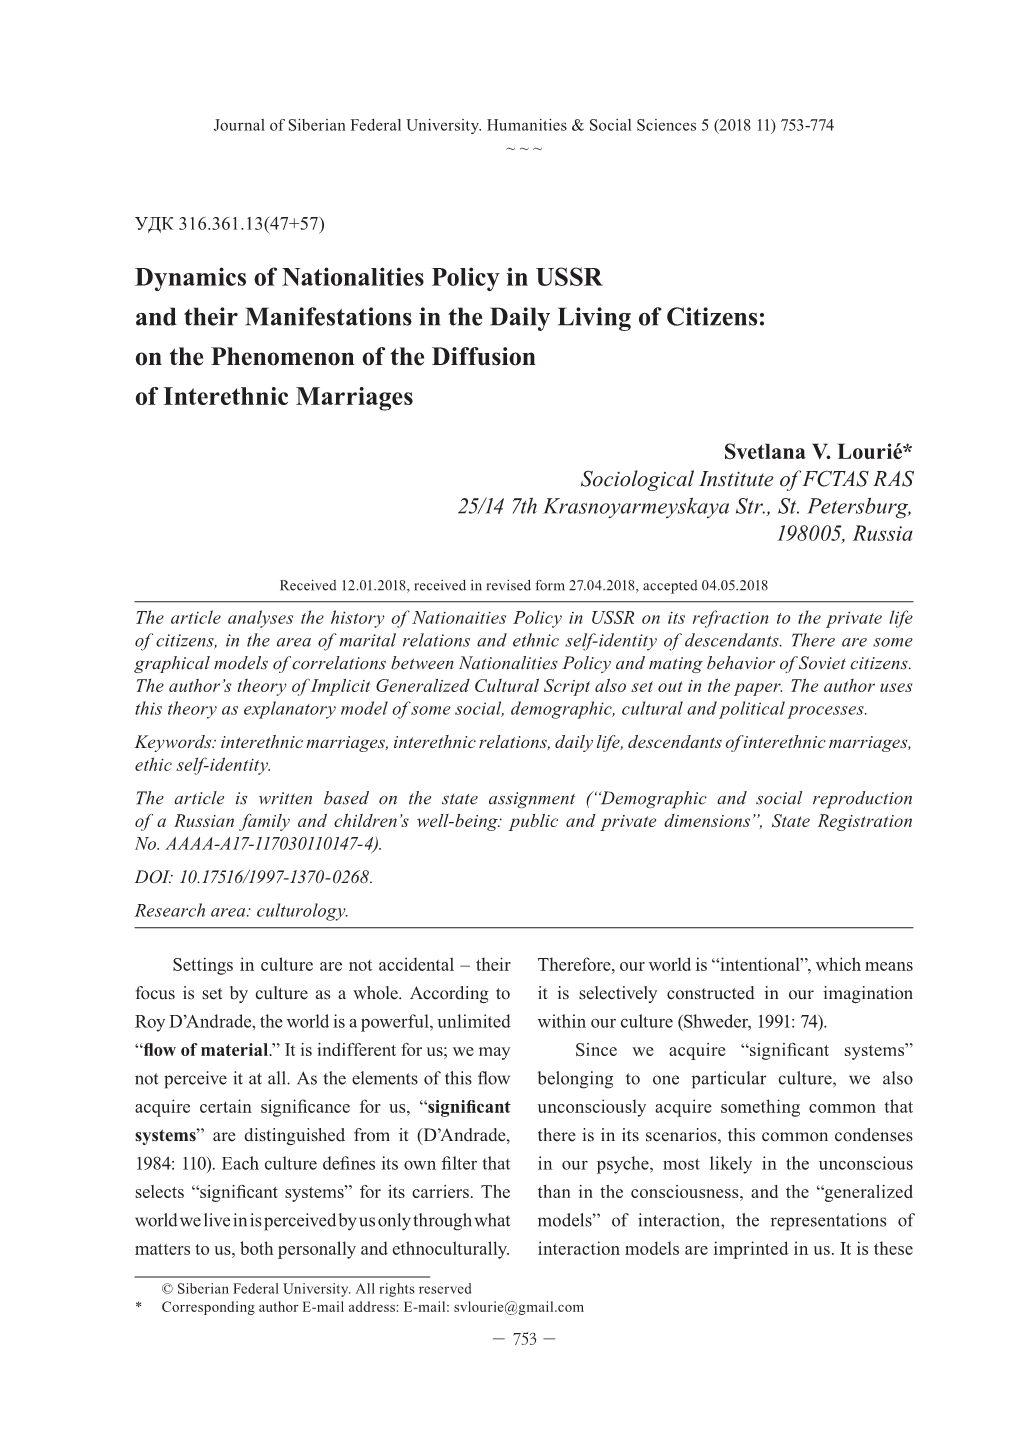 Dynamics of Nationalities Policy in USSR and Their Manifestations in the Daily Living of Citizens: on the Phenomenon of the Diffusion of Interethnic Marriages